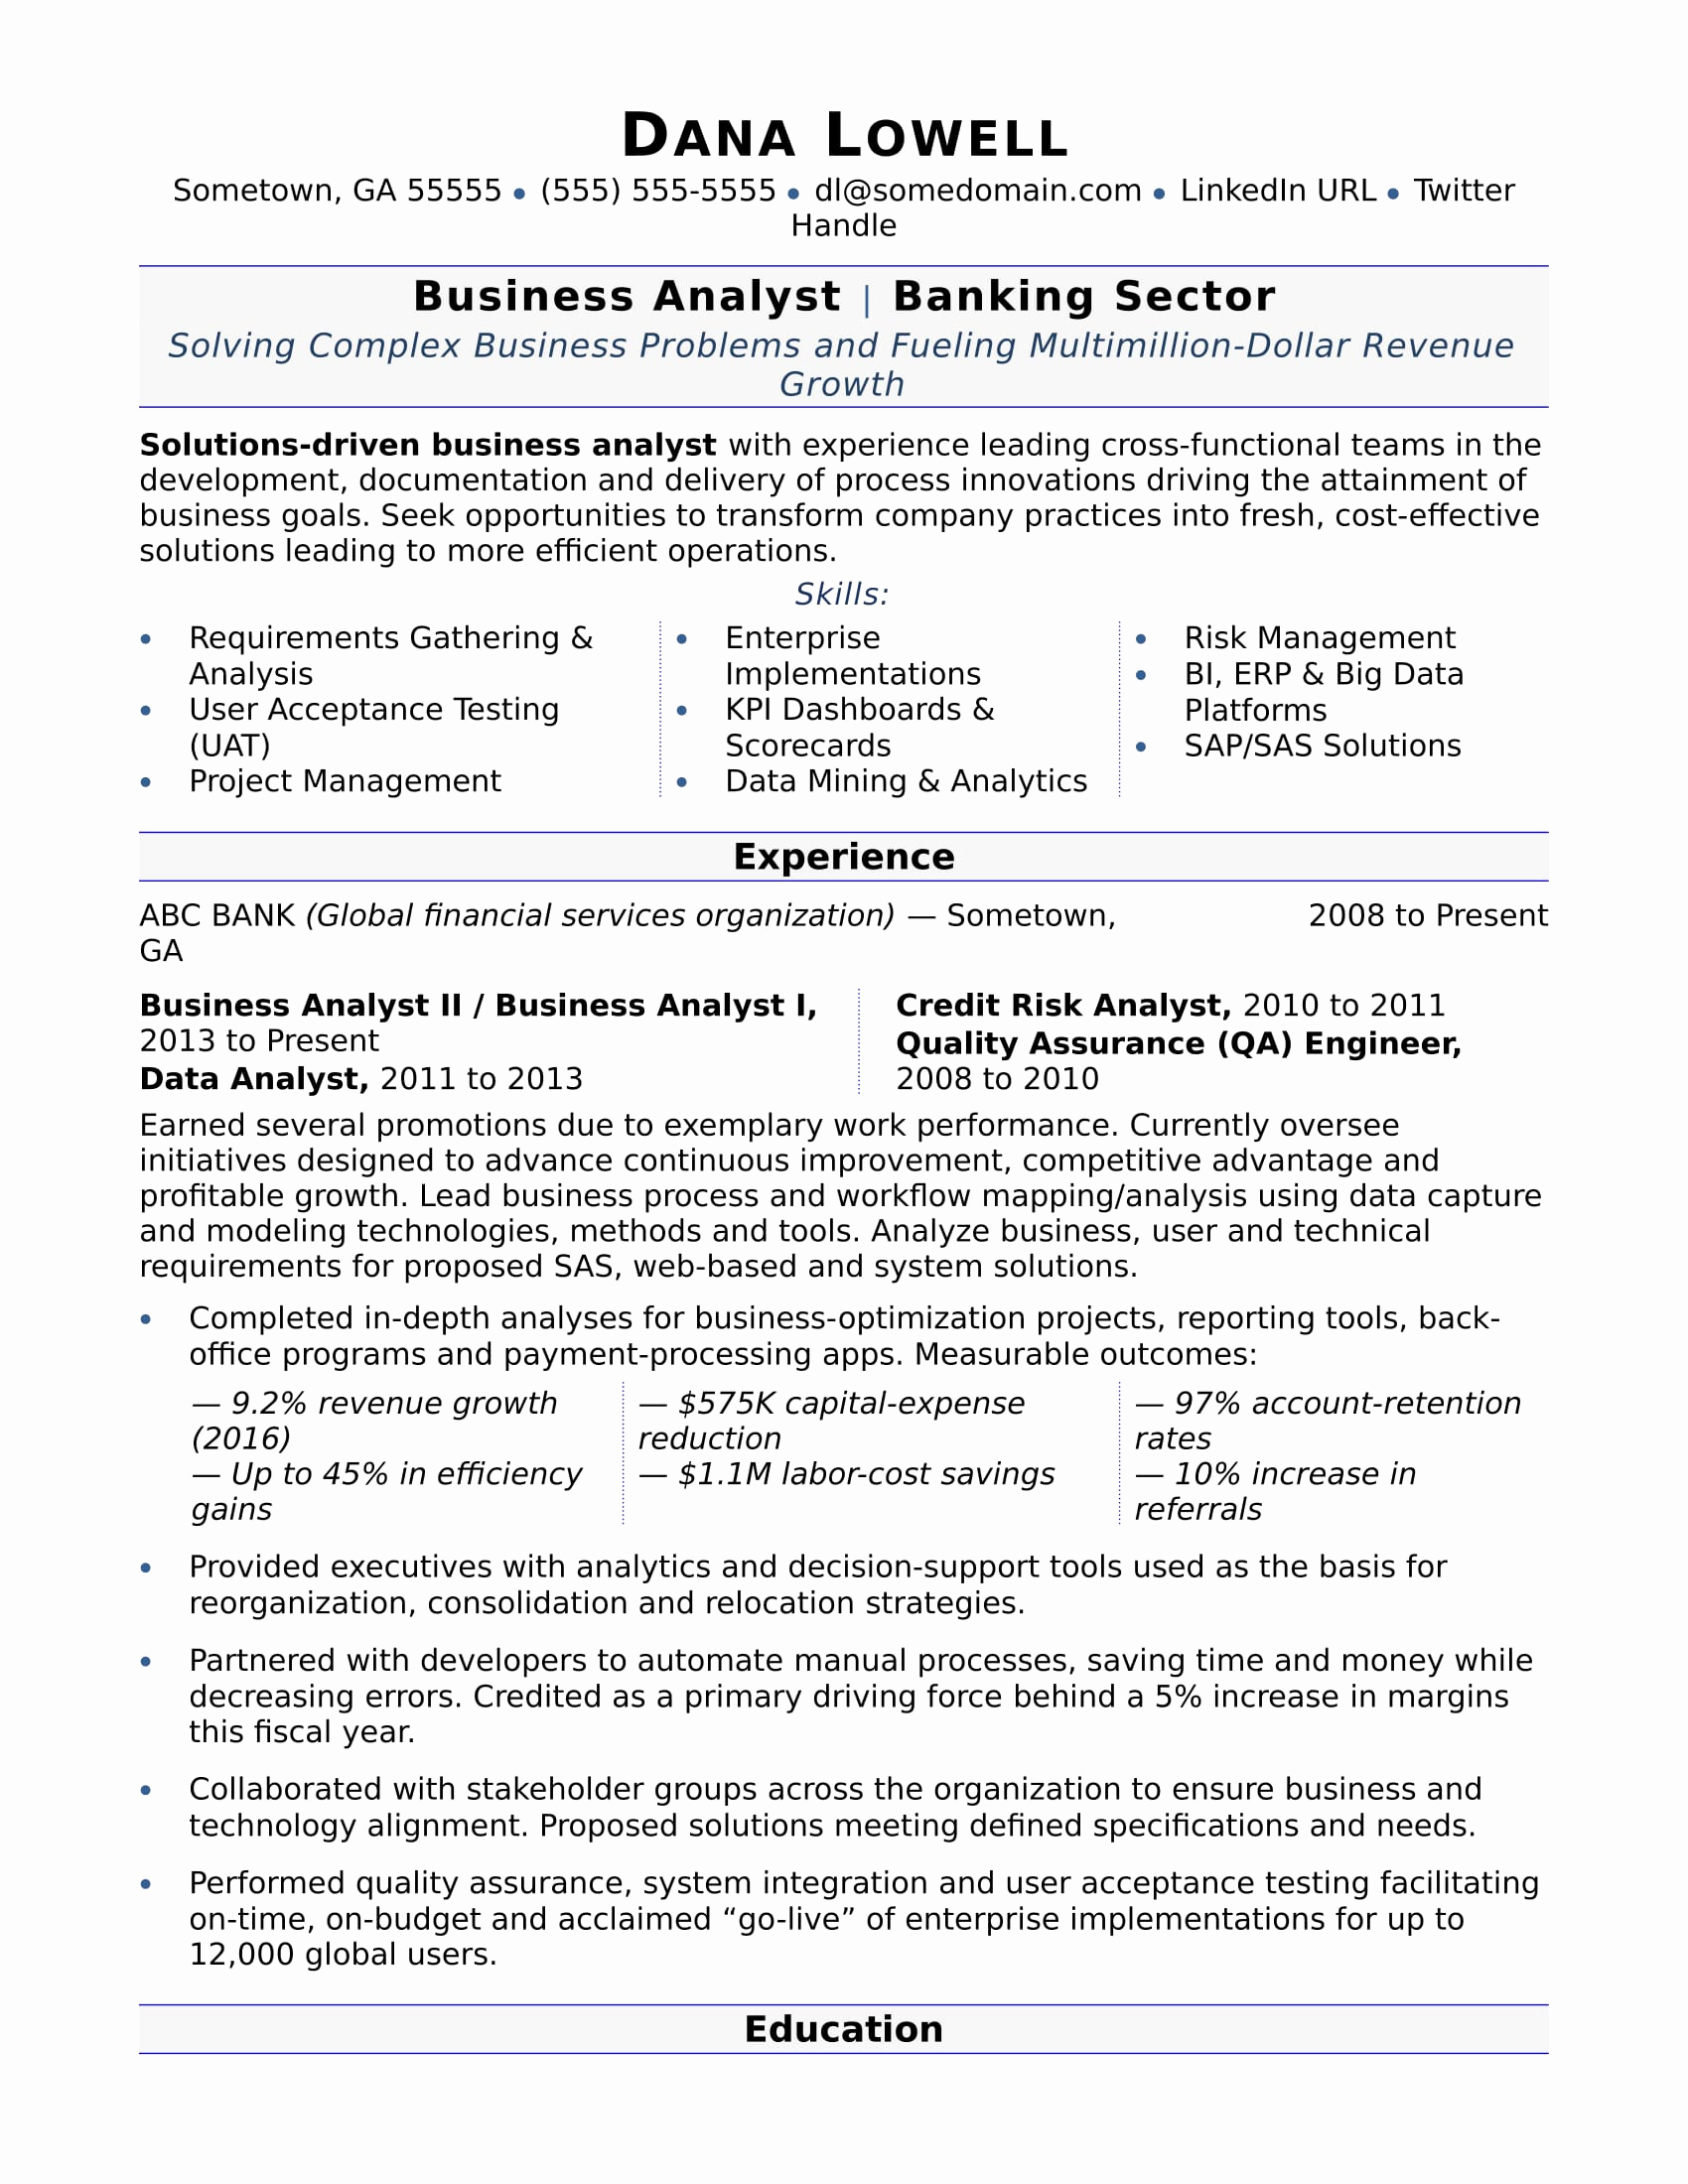 Data Analyst Resume Entry Level Unique Business Analyst Resume Sample